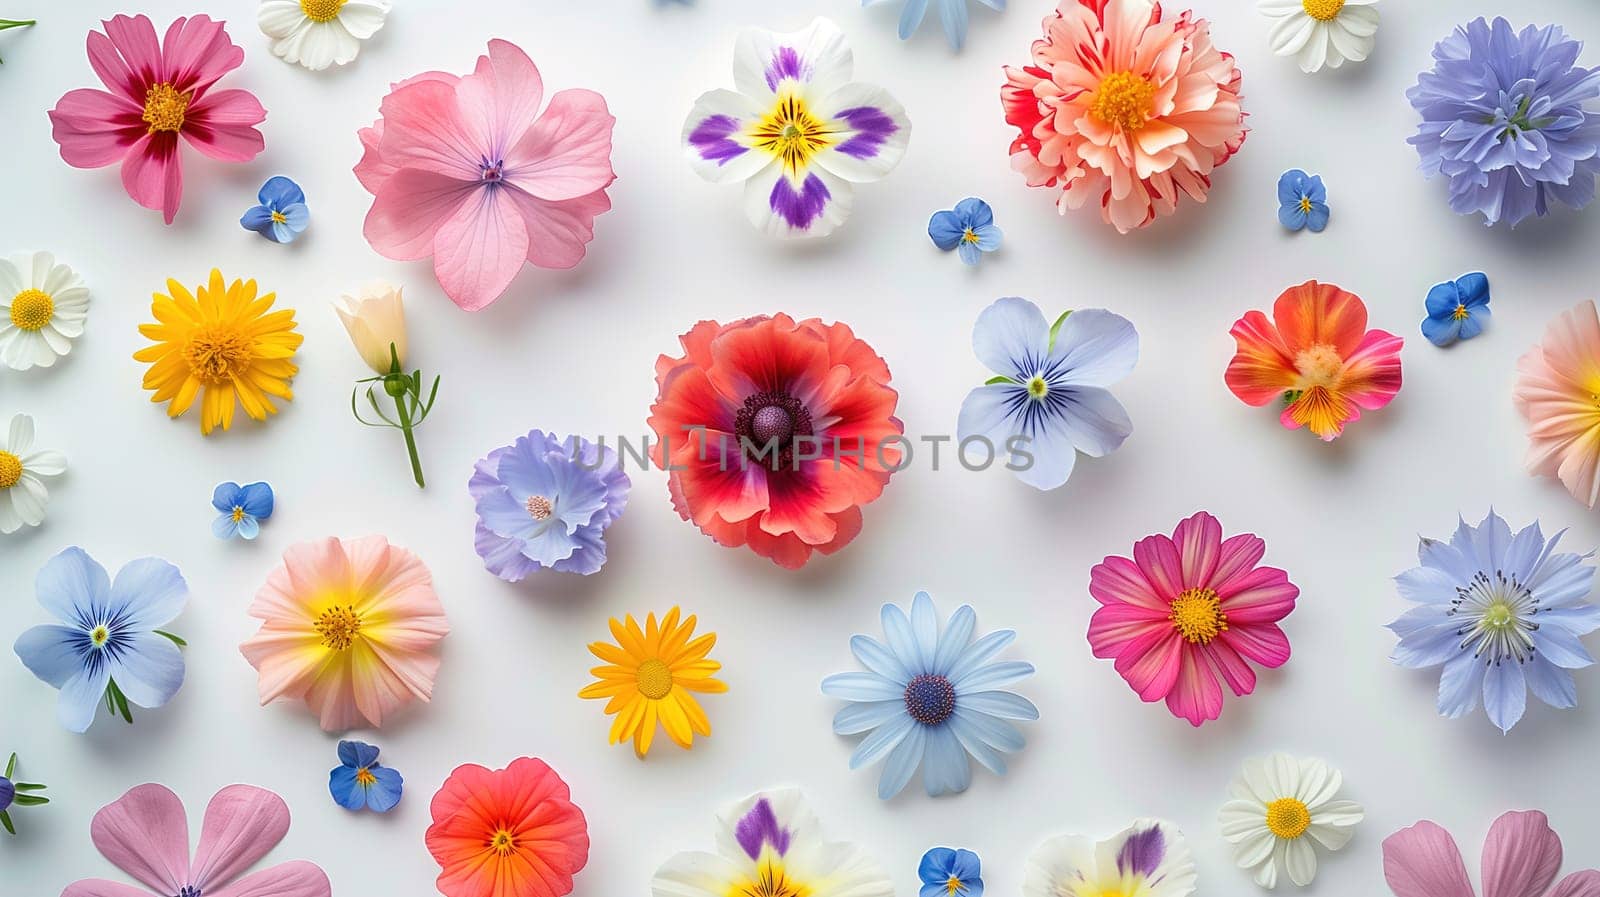 A vibrant assortment of differently colored flowers scattered on a clean white surface. Each bloom adds a pop of color to the scene, creating a lively and colorful display.